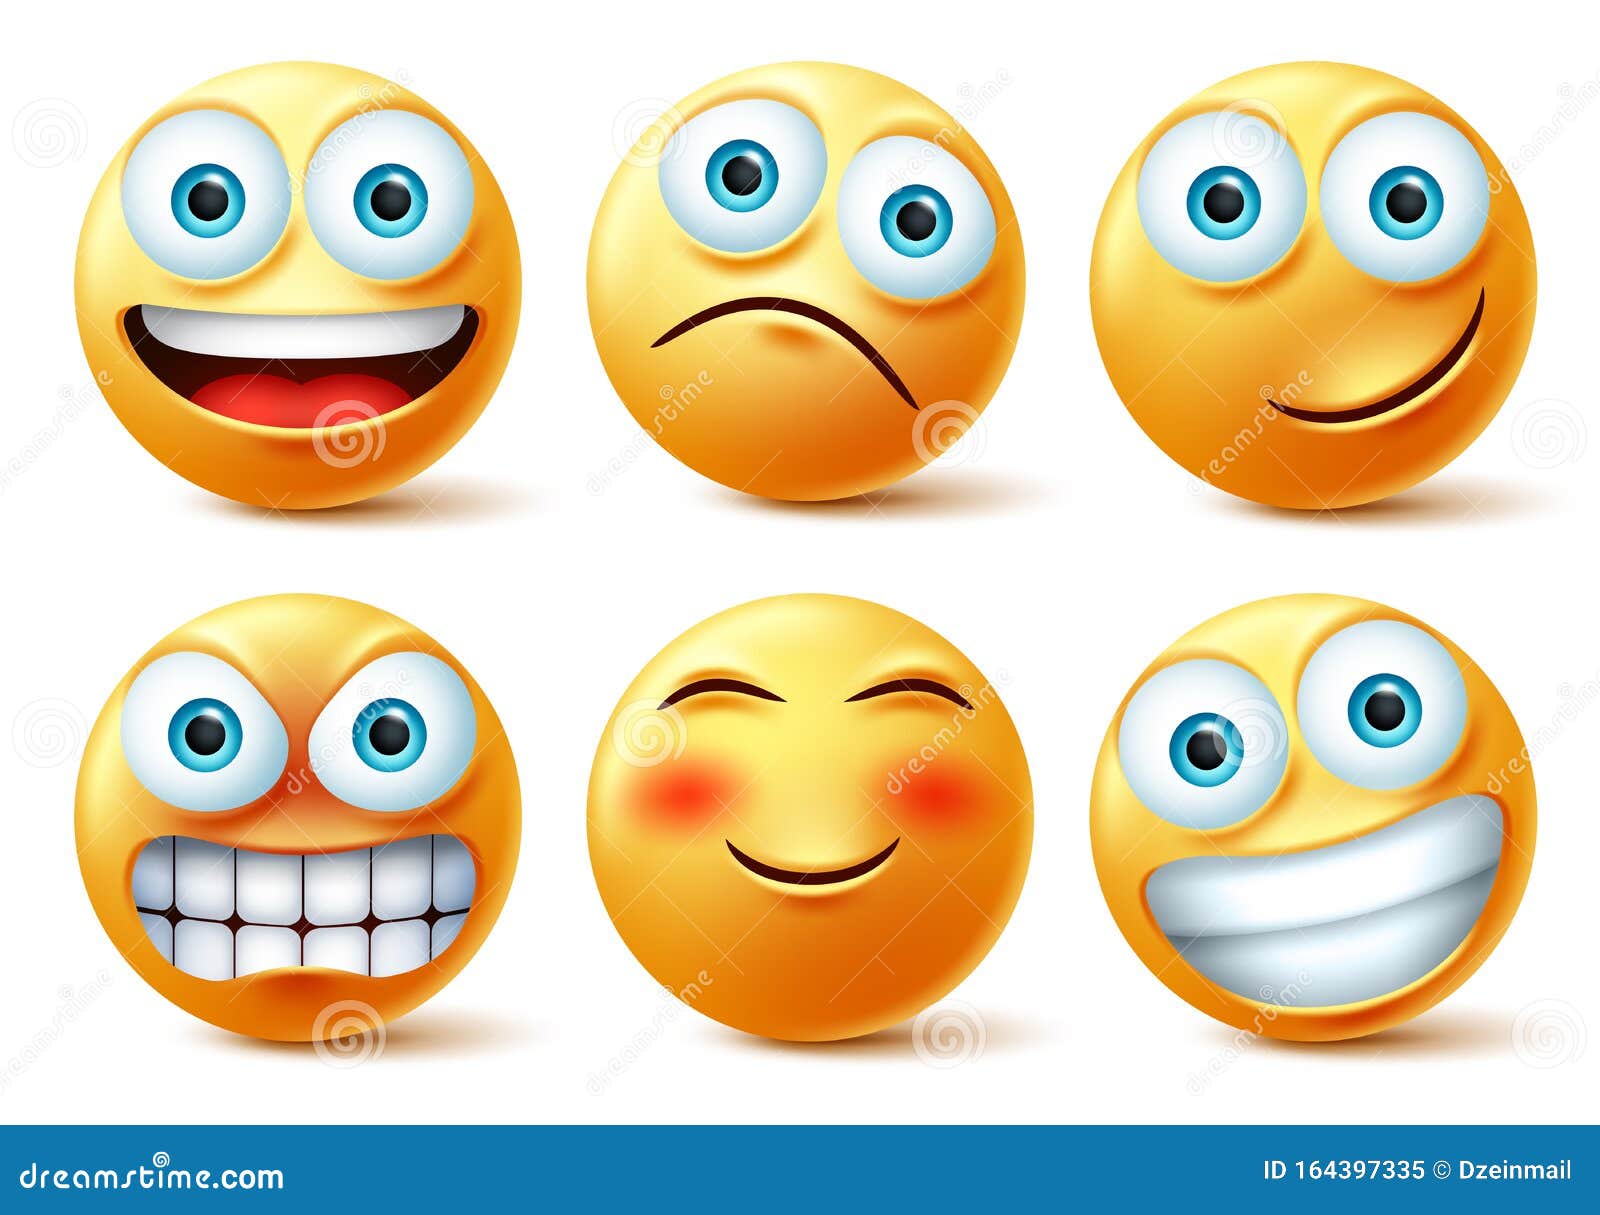 smileys emojis and emoticons face  set. smiley emoji cute faces in happy, angry and funny facial expression.